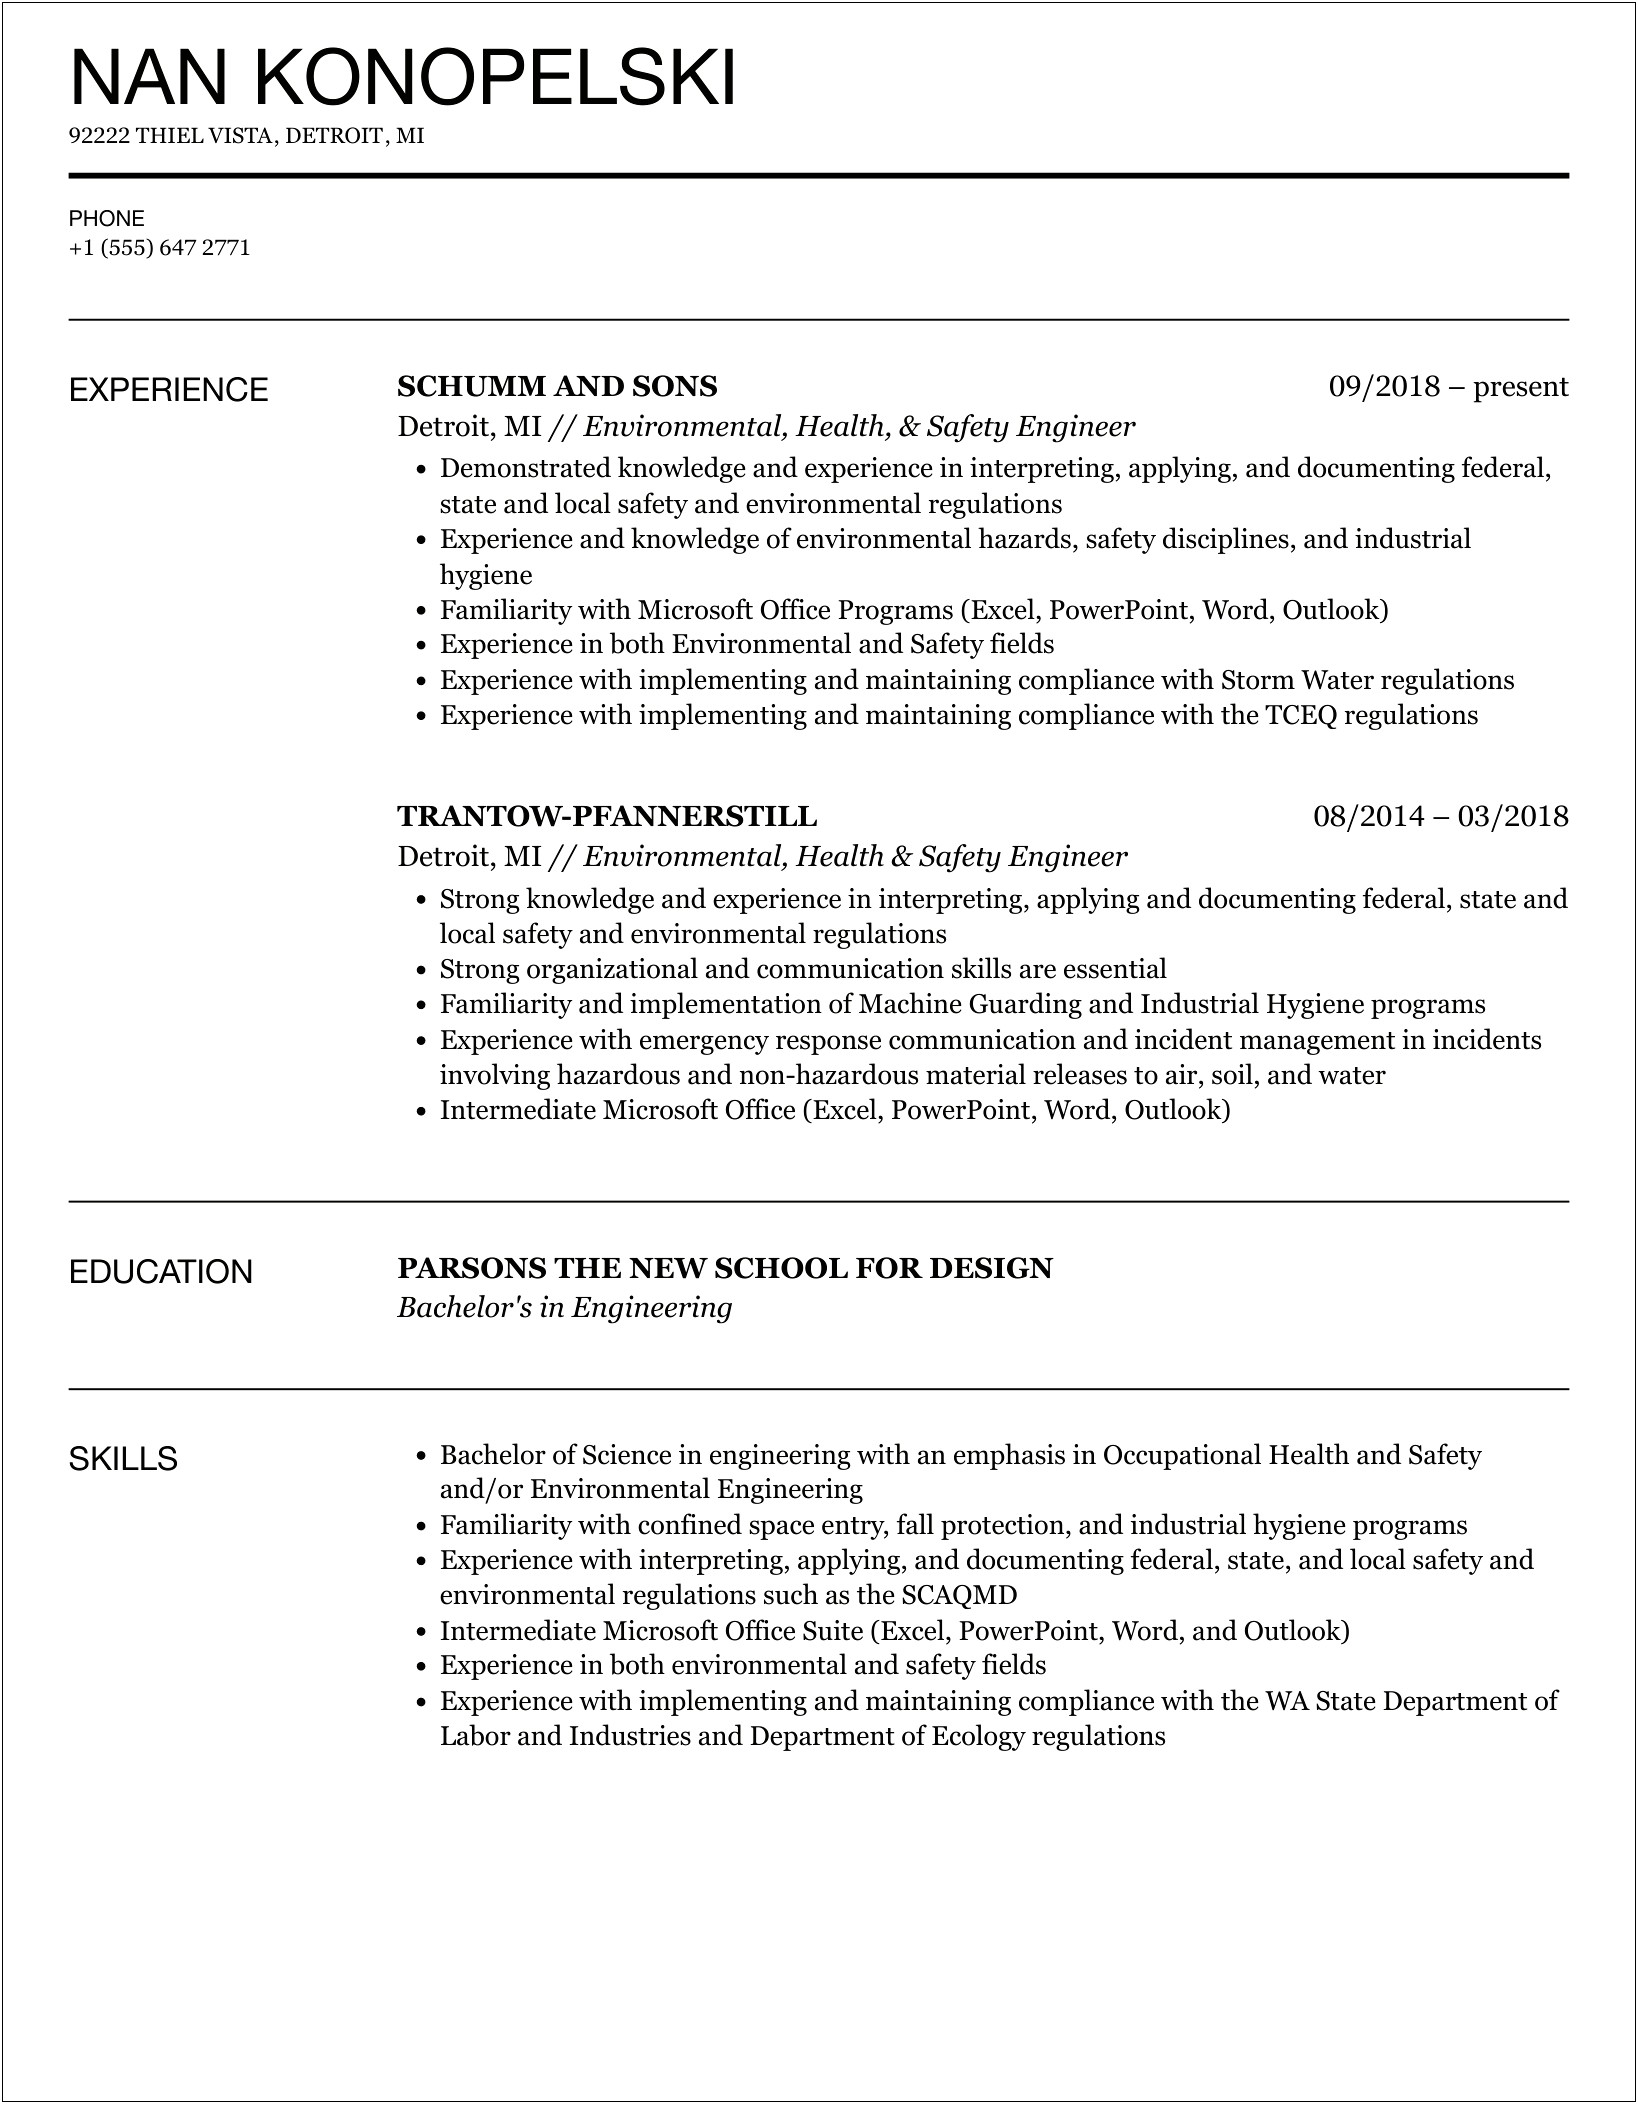 Resume Sample For Environmental Health And Engineer